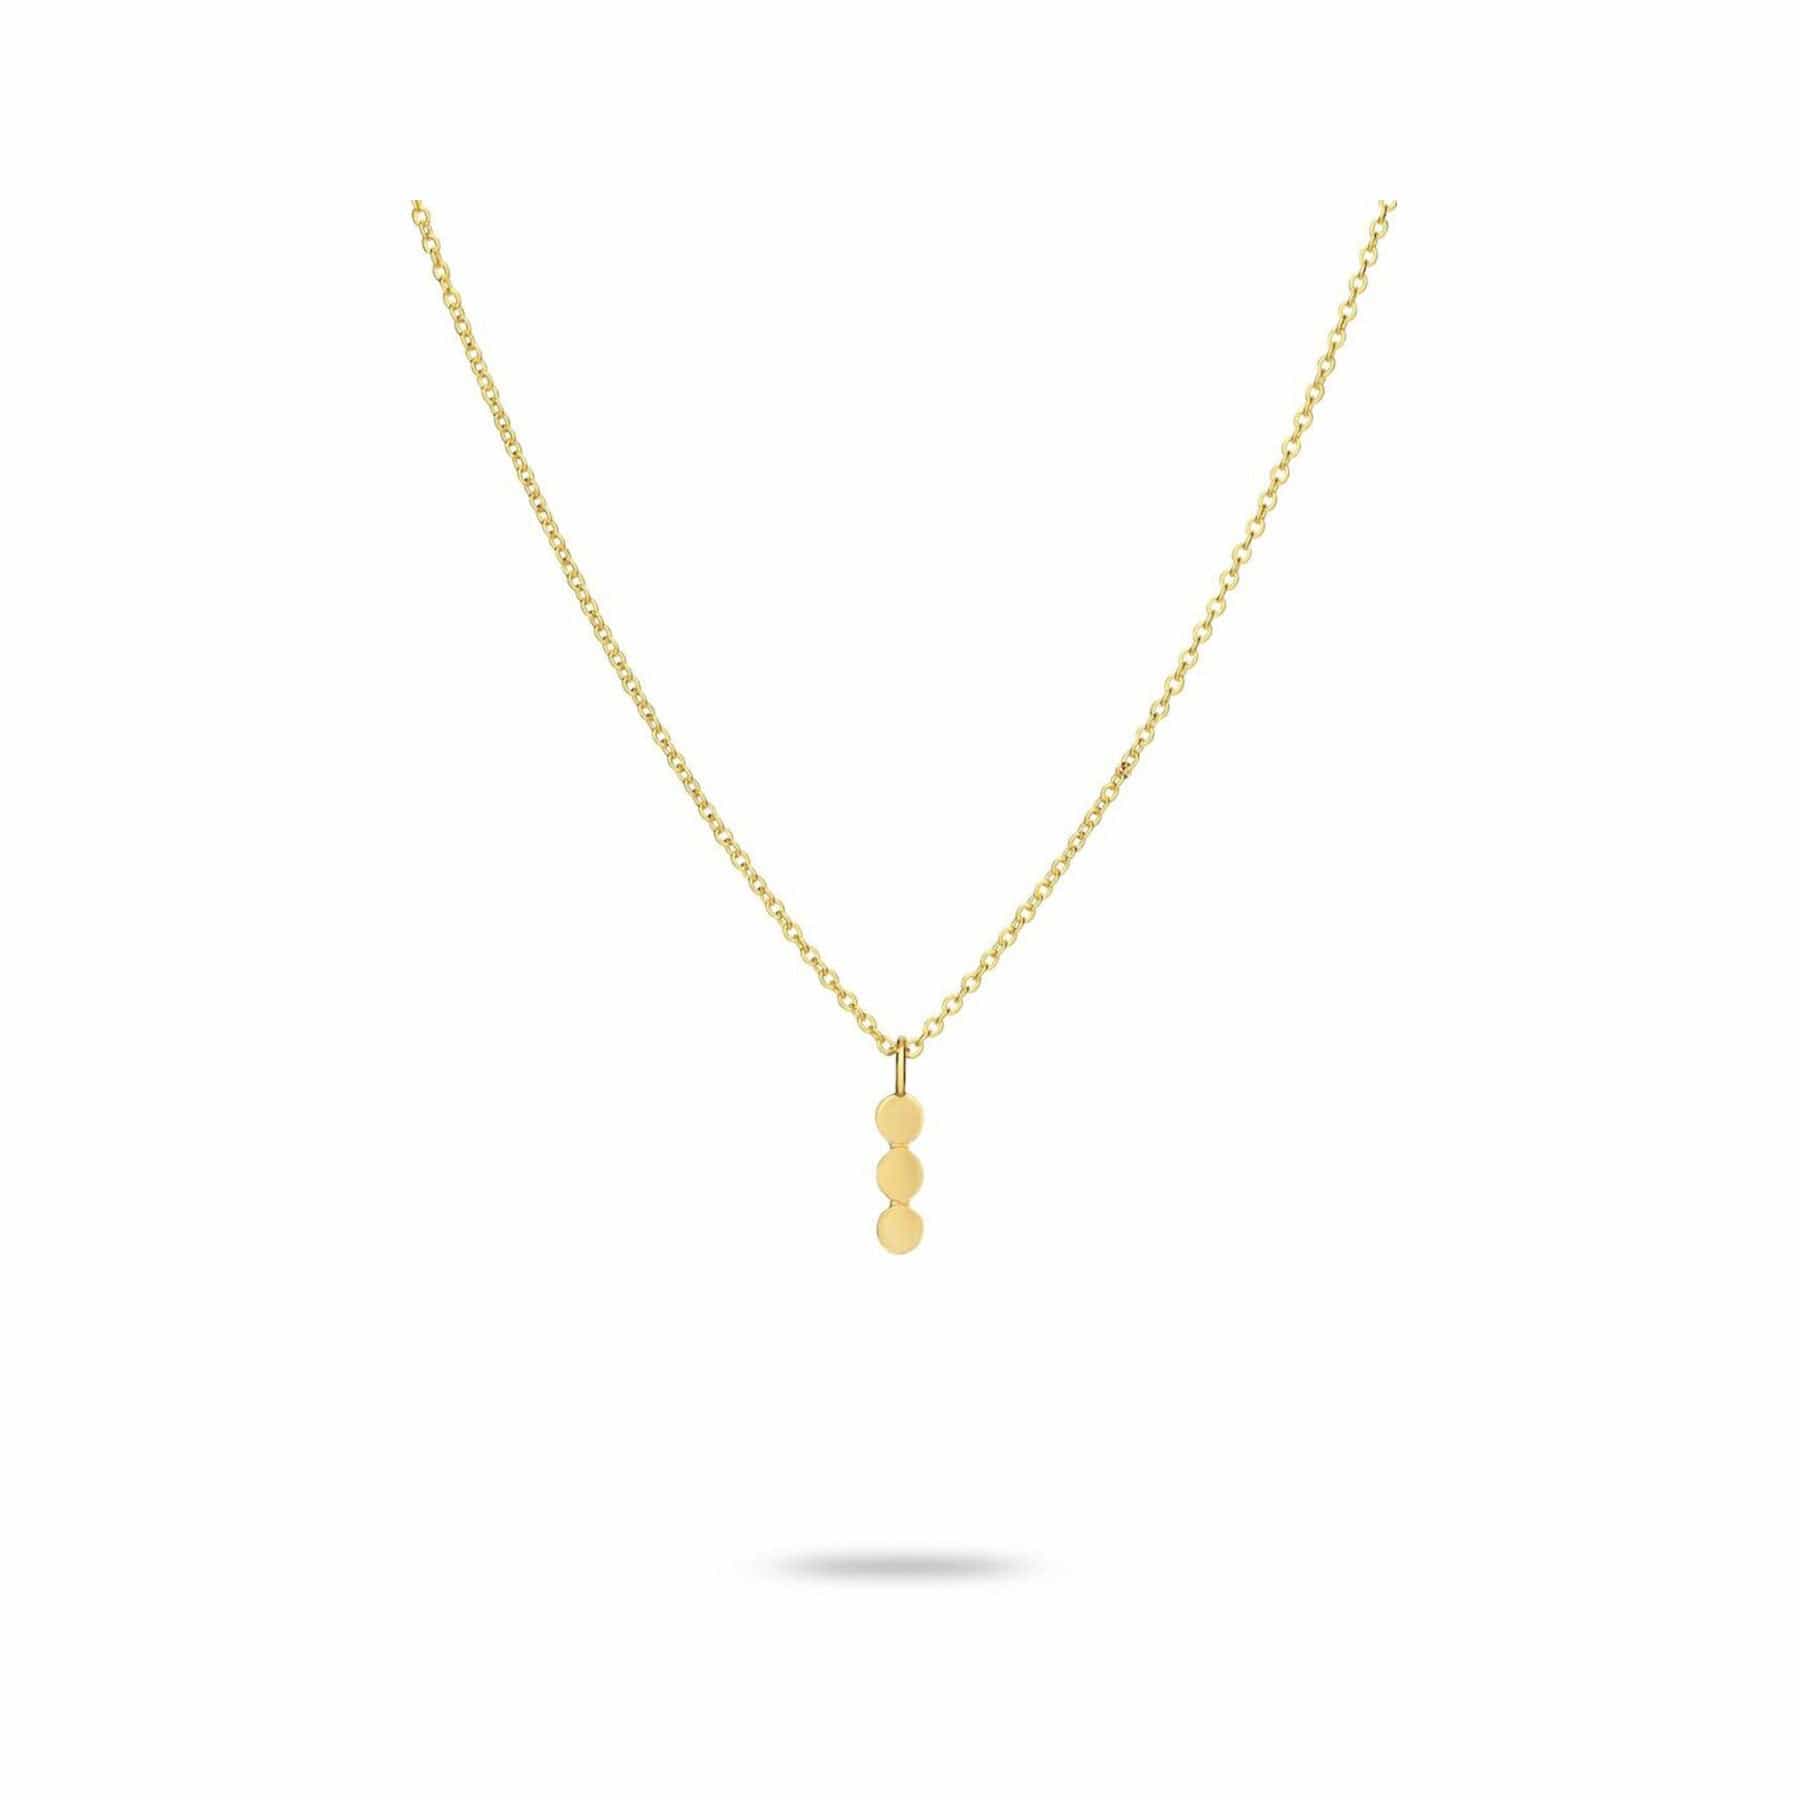 Gold fern necklace